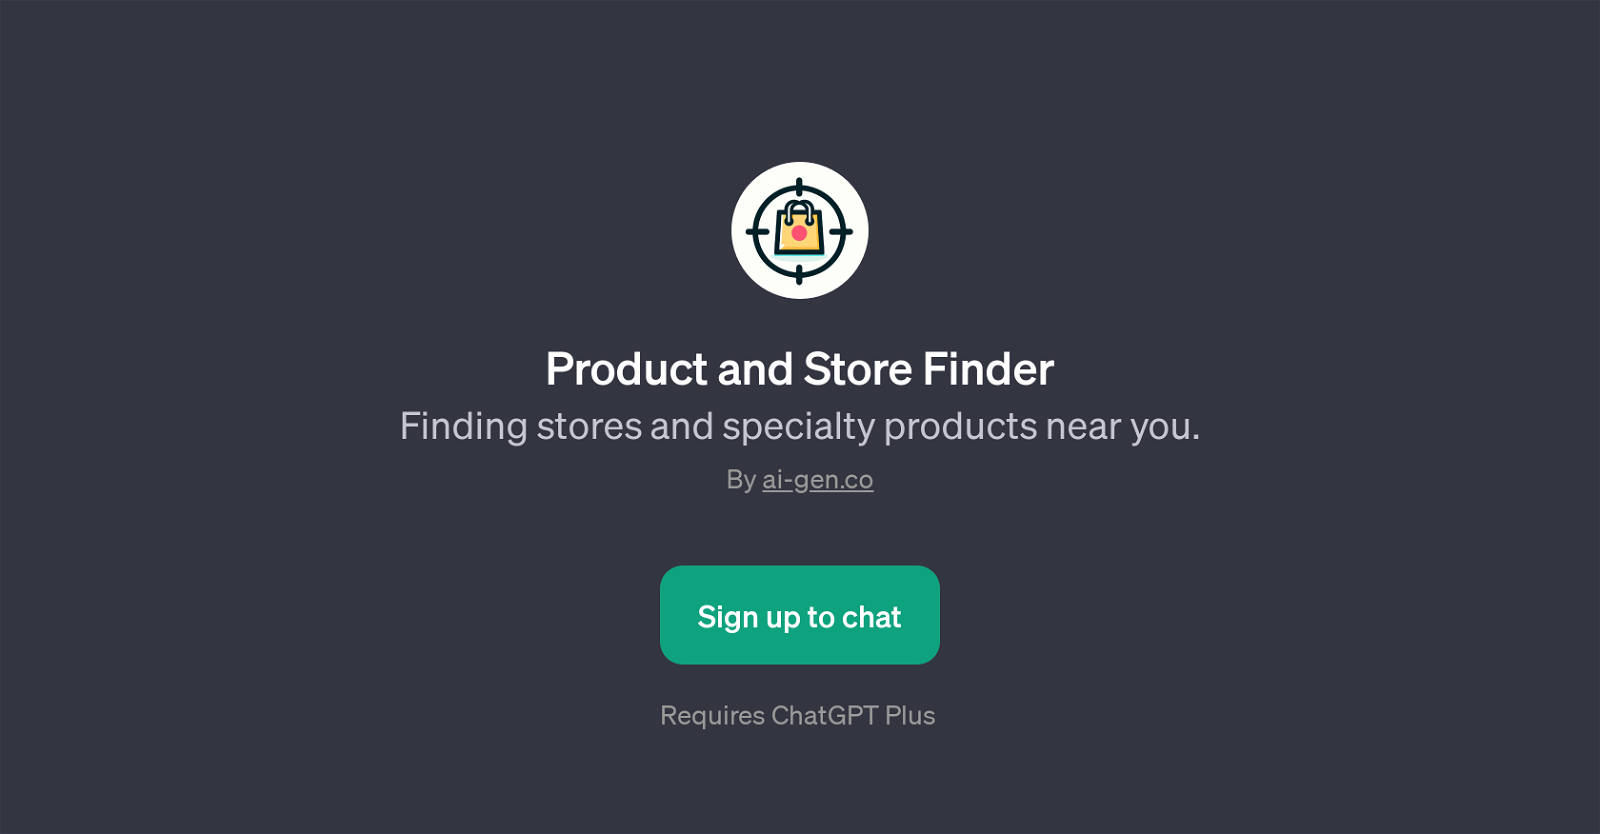 Product and Store Finder website